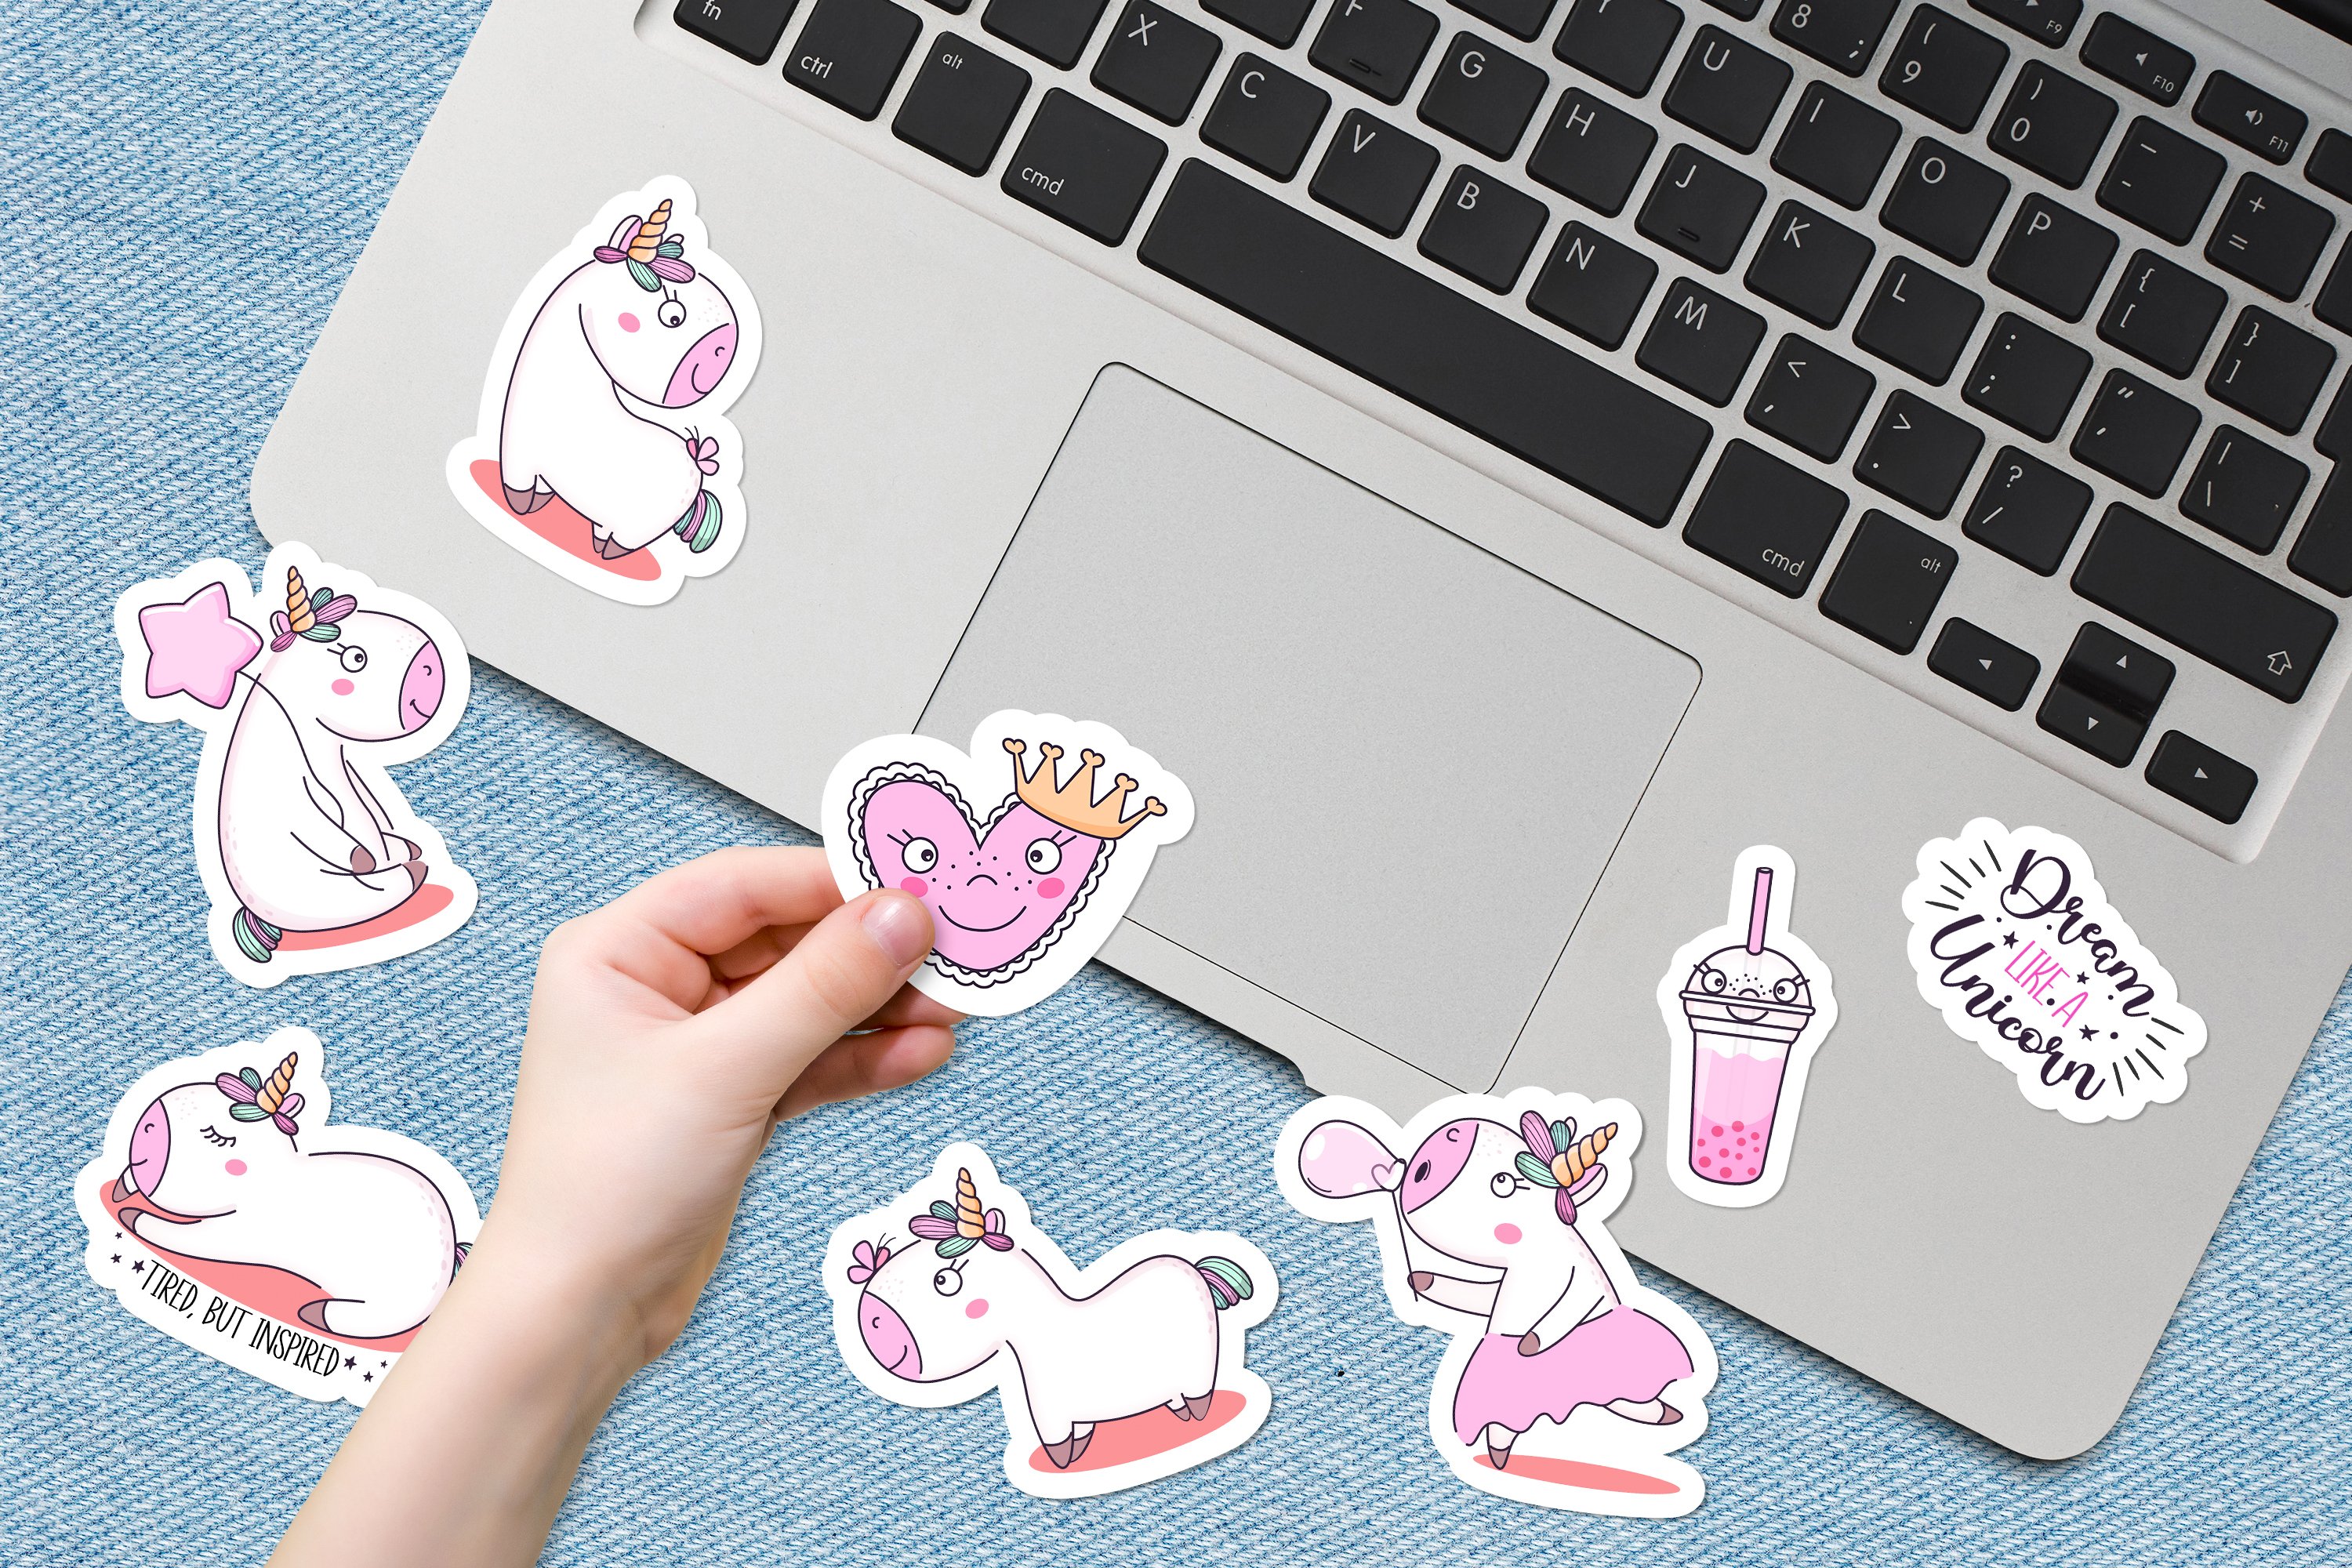 Image of stickers with unicorns.